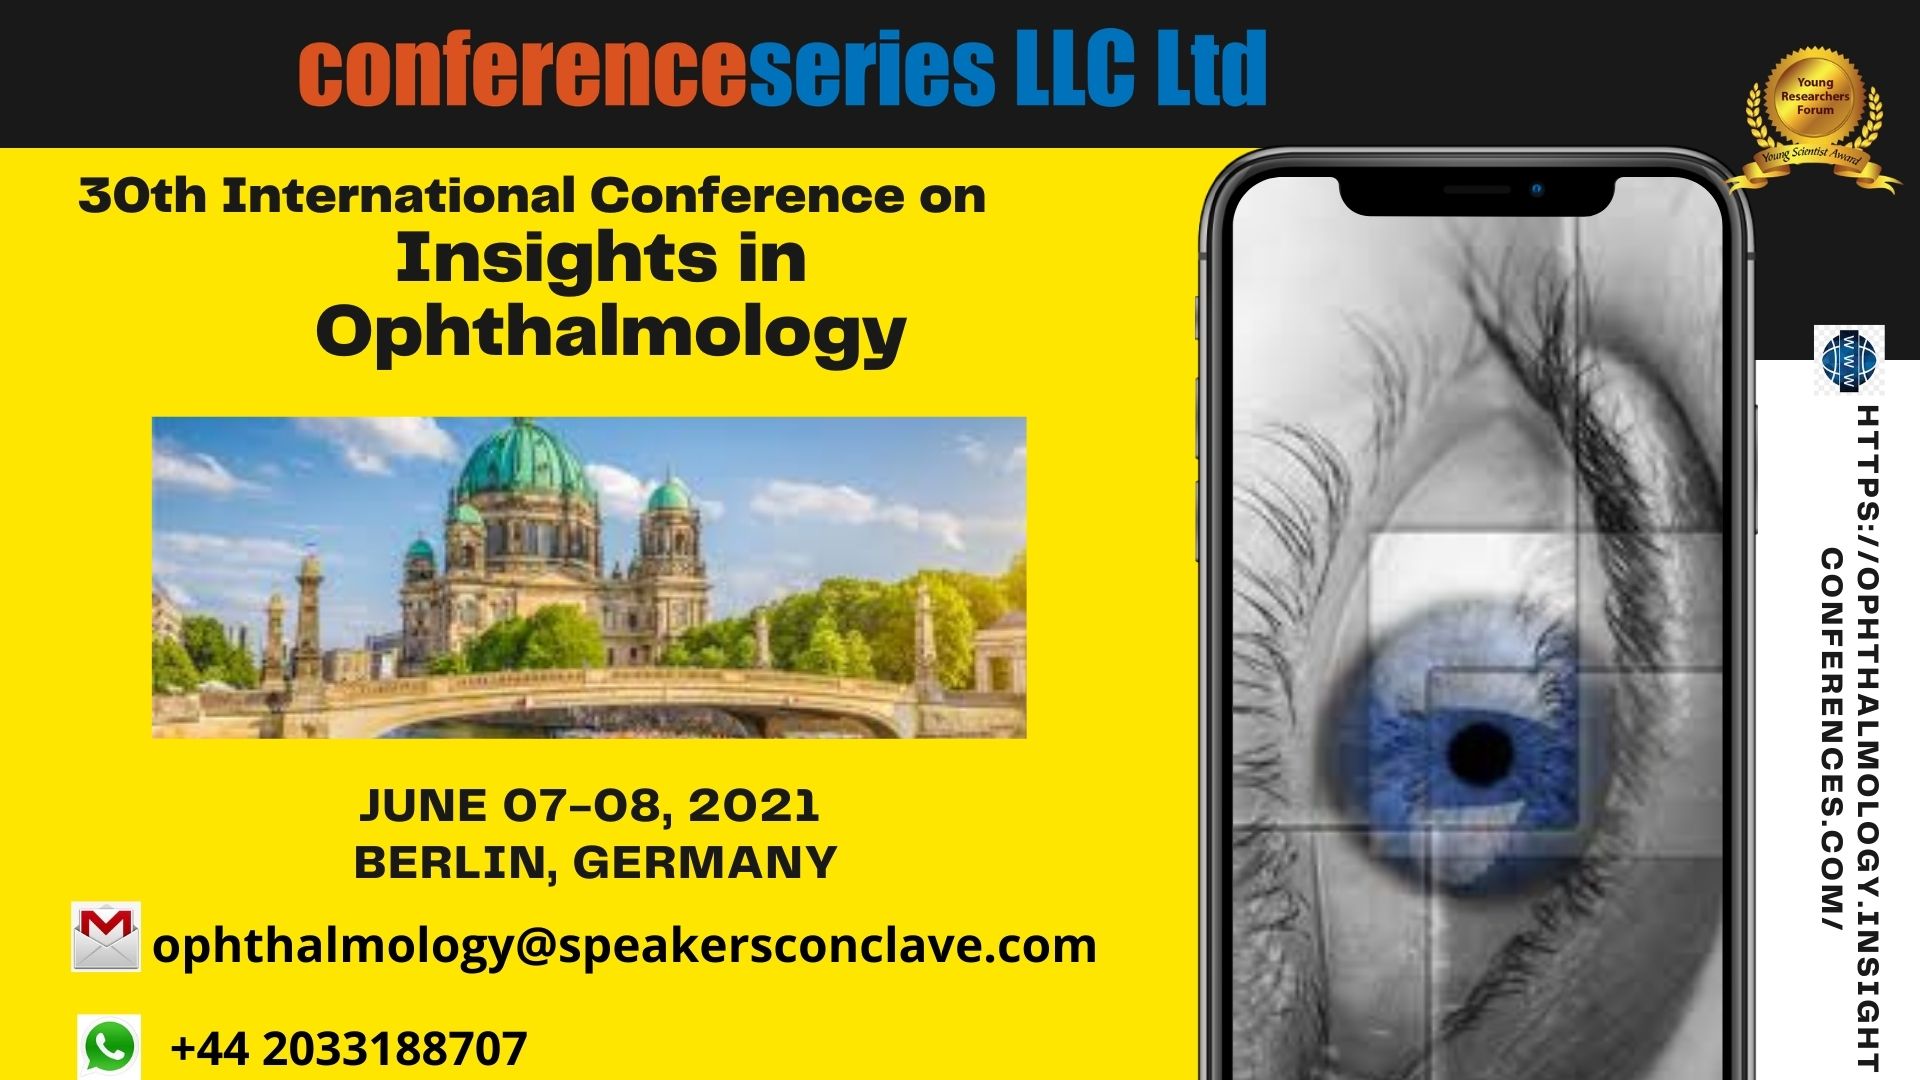 30th International Conference on Insights in Ophthalmology